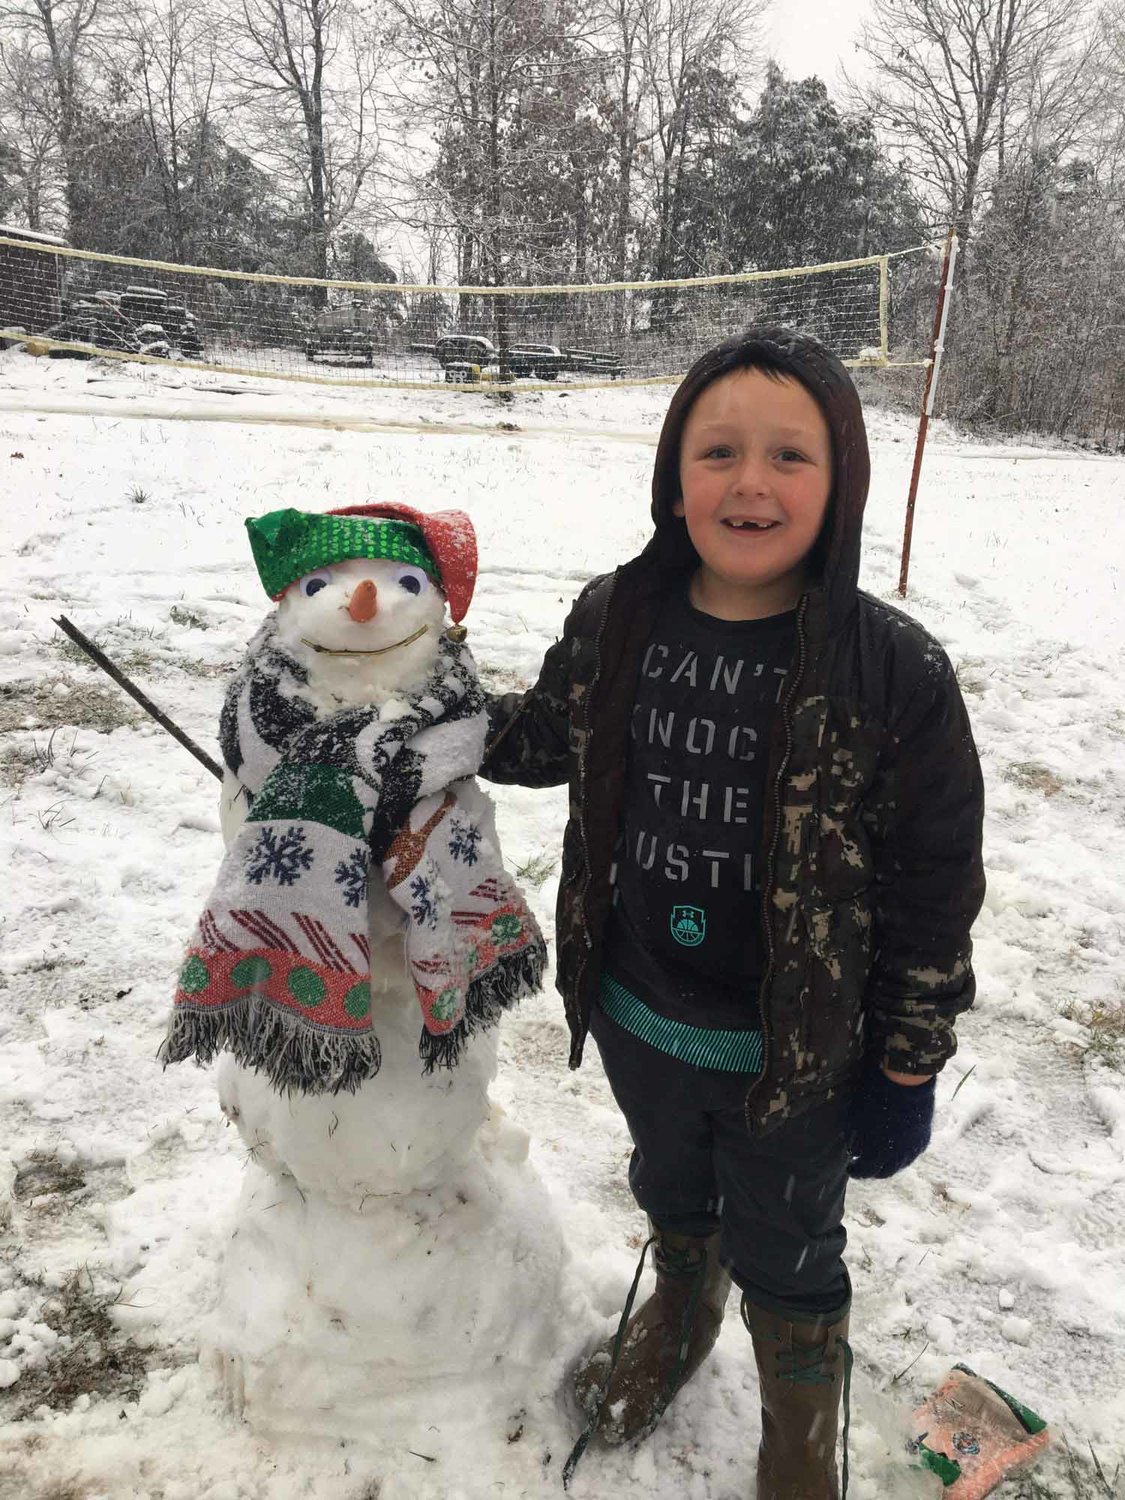 Jimmy Brizendine, a first-grader at Kingston, made his first snowman.